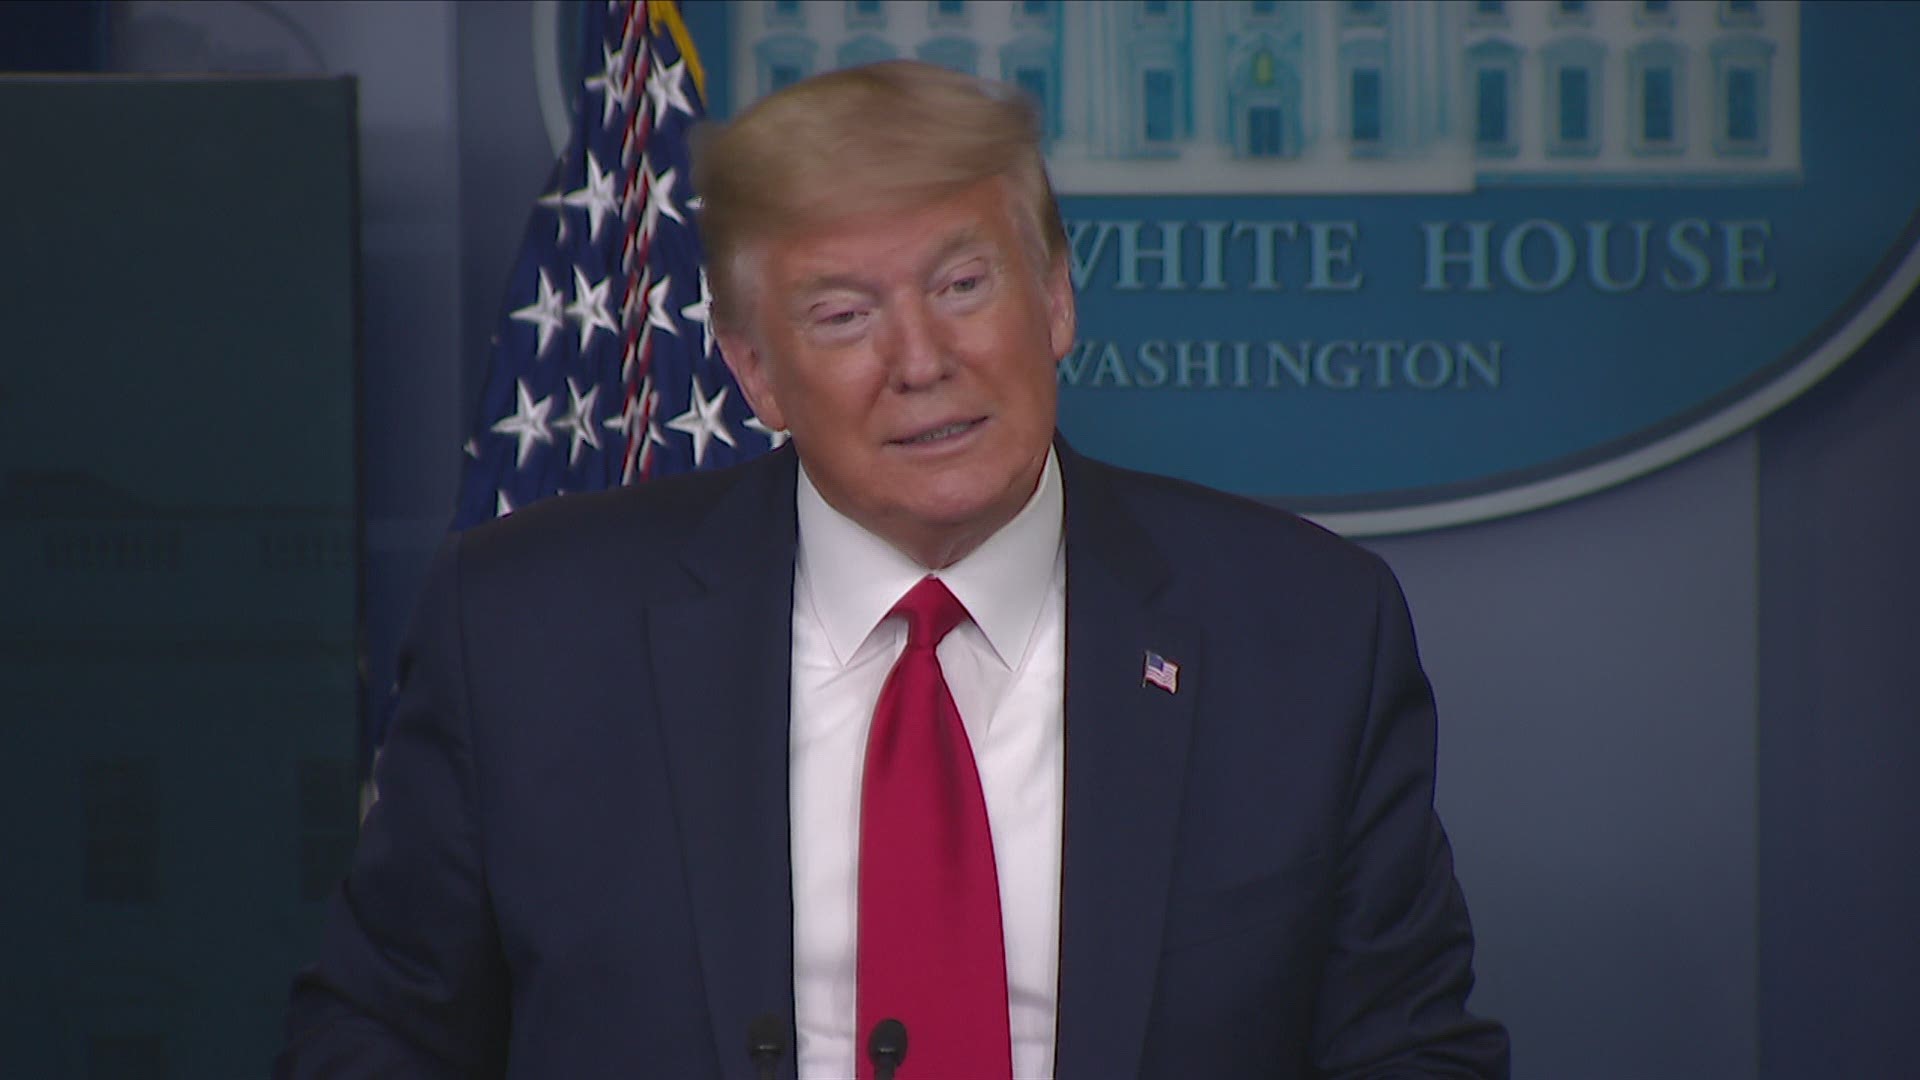 President Trump also said Wednesday that he'd support reducing the pay of the Tennessee Valley Authority's head as part of infrastructure legislation.